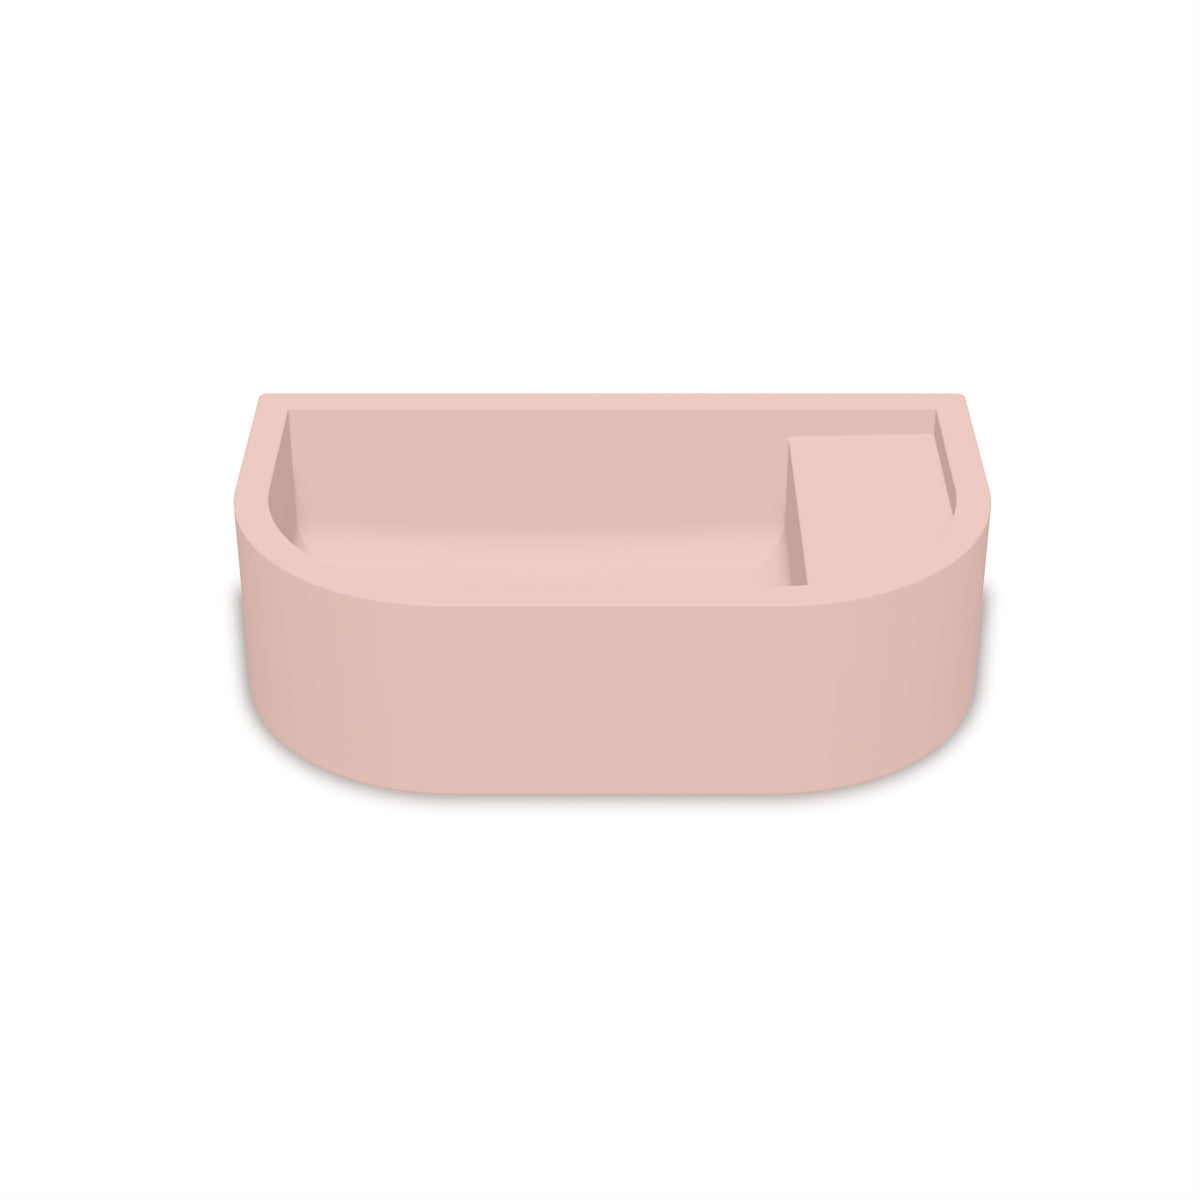 Loop 01 Basin - Overflow - Surface Mount (Blush Pink,No Tap Hole,Chrome)